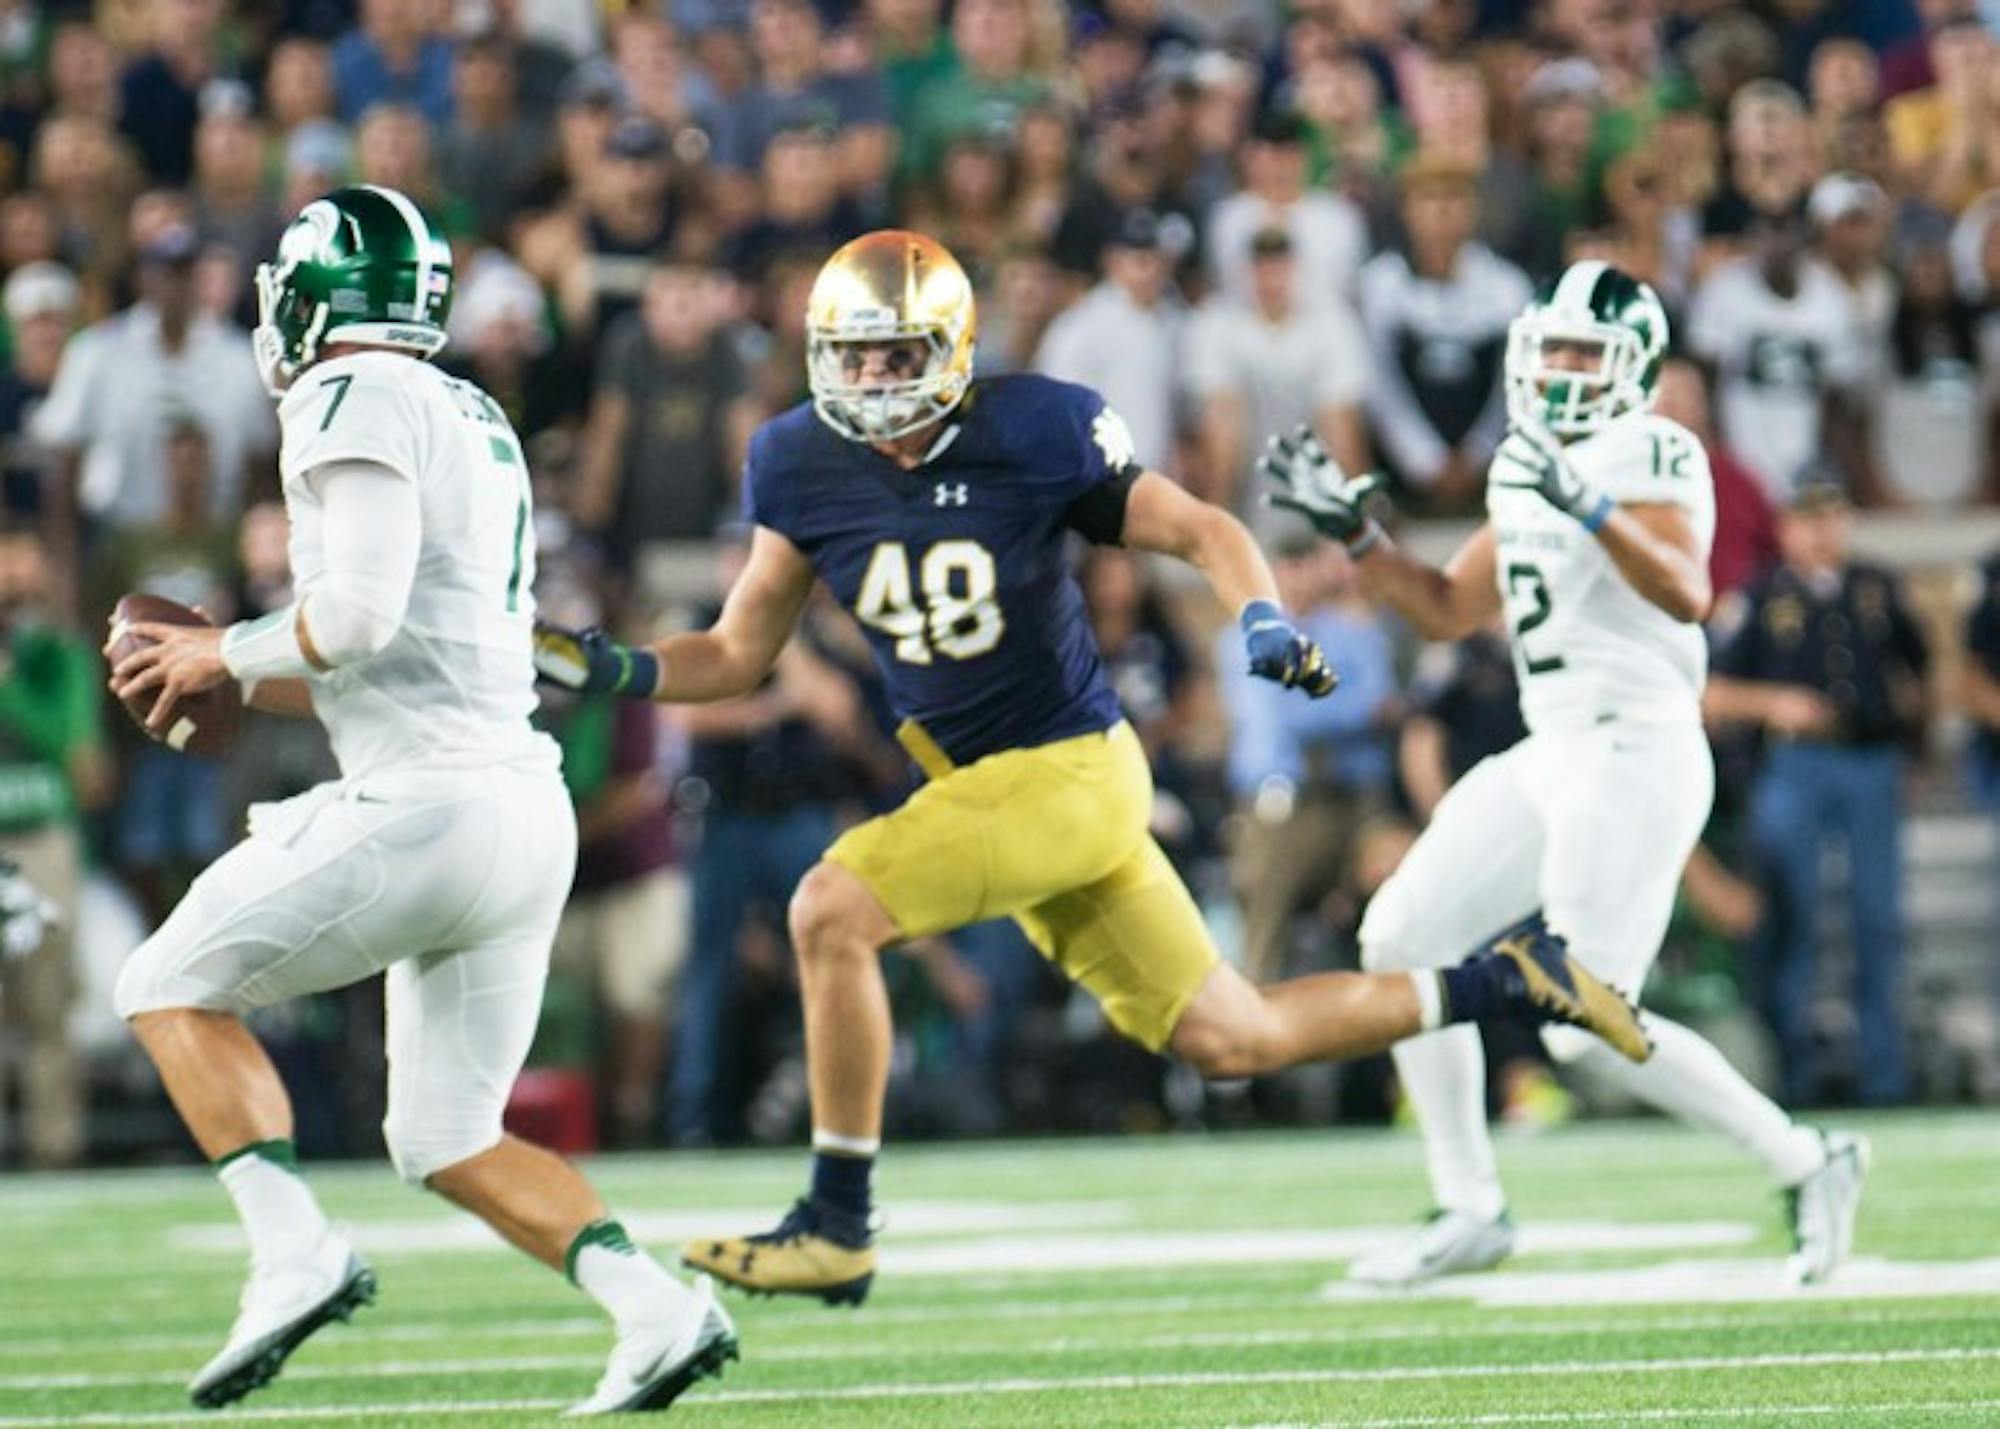 Irish junior linebacker Greer Martini chases the quarterback during Notre Dame’s 36-28 loss on Saturday. Martini has 16 total tackles on the season and has shared time with sophomore Te’von Coney.